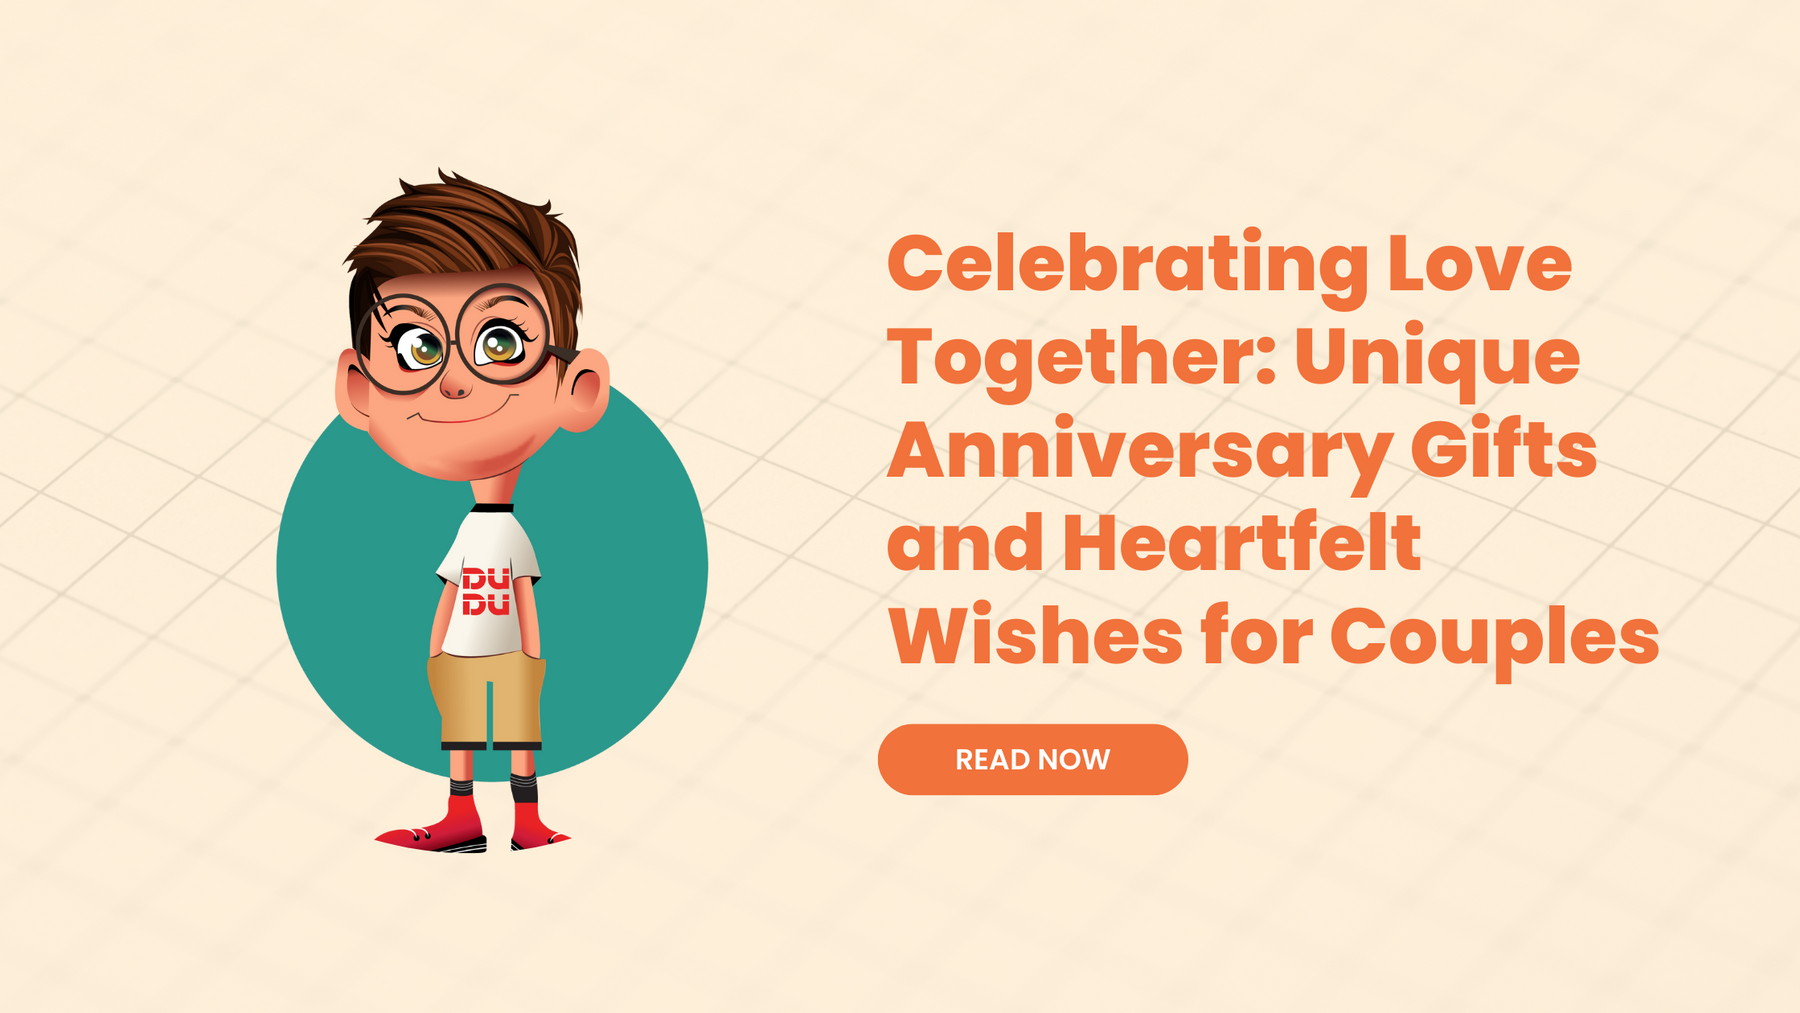 Celebrating Love Together: Unique Anniversary Gifts and Heartfelt Wishes for Couples